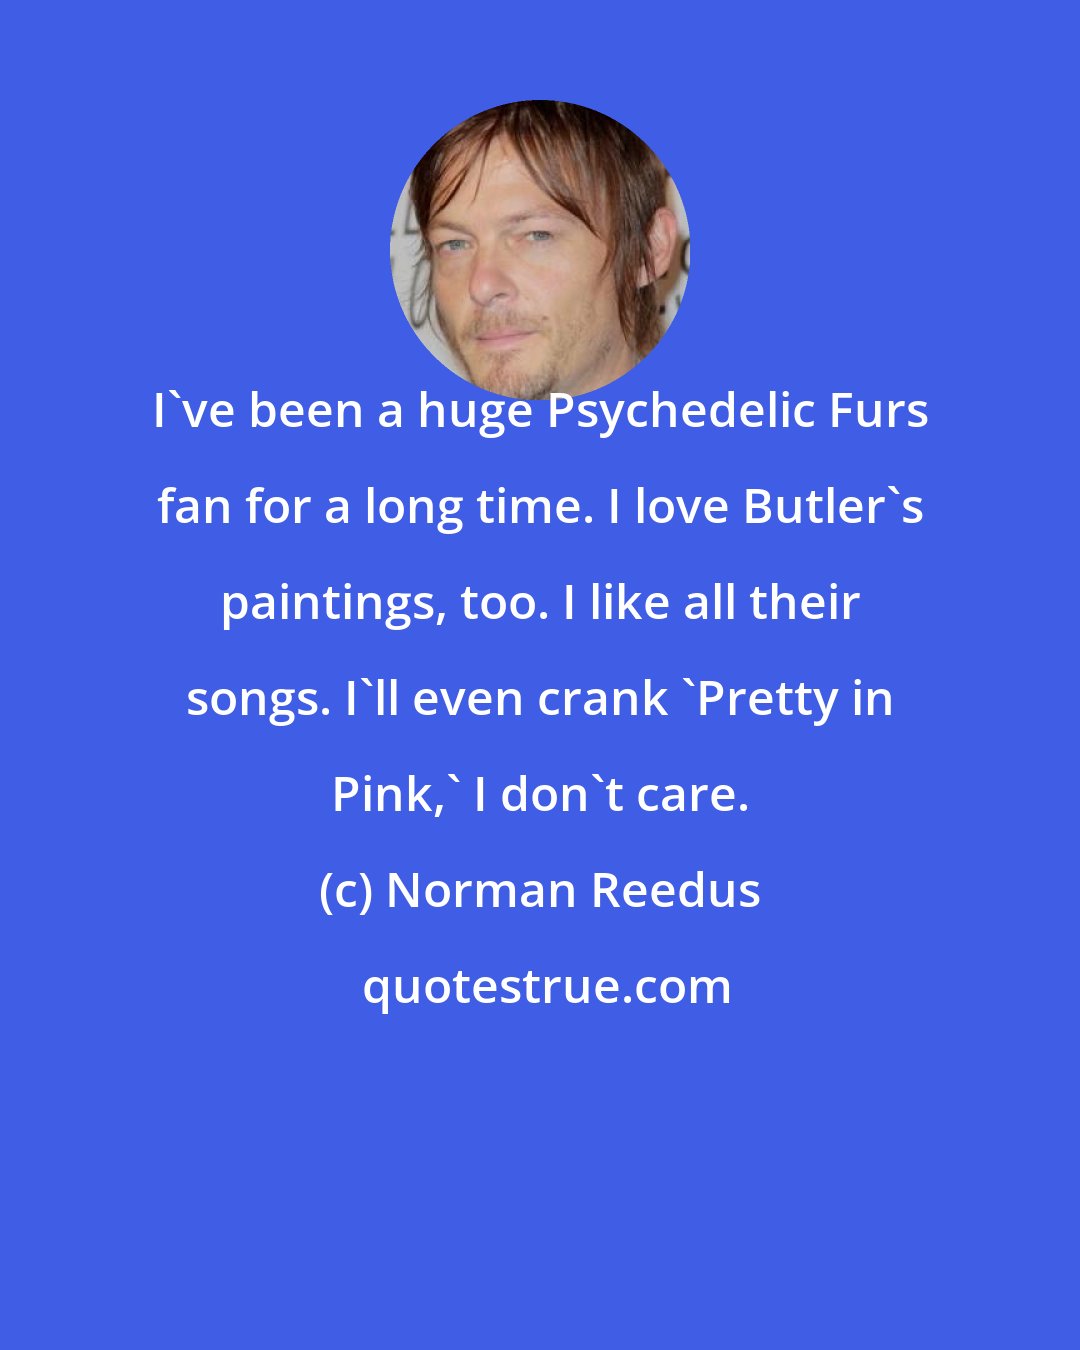 Norman Reedus: I've been a huge Psychedelic Furs fan for a long time. I love Butler's paintings, too. I like all their songs. I'll even crank 'Pretty in Pink,' I don't care.